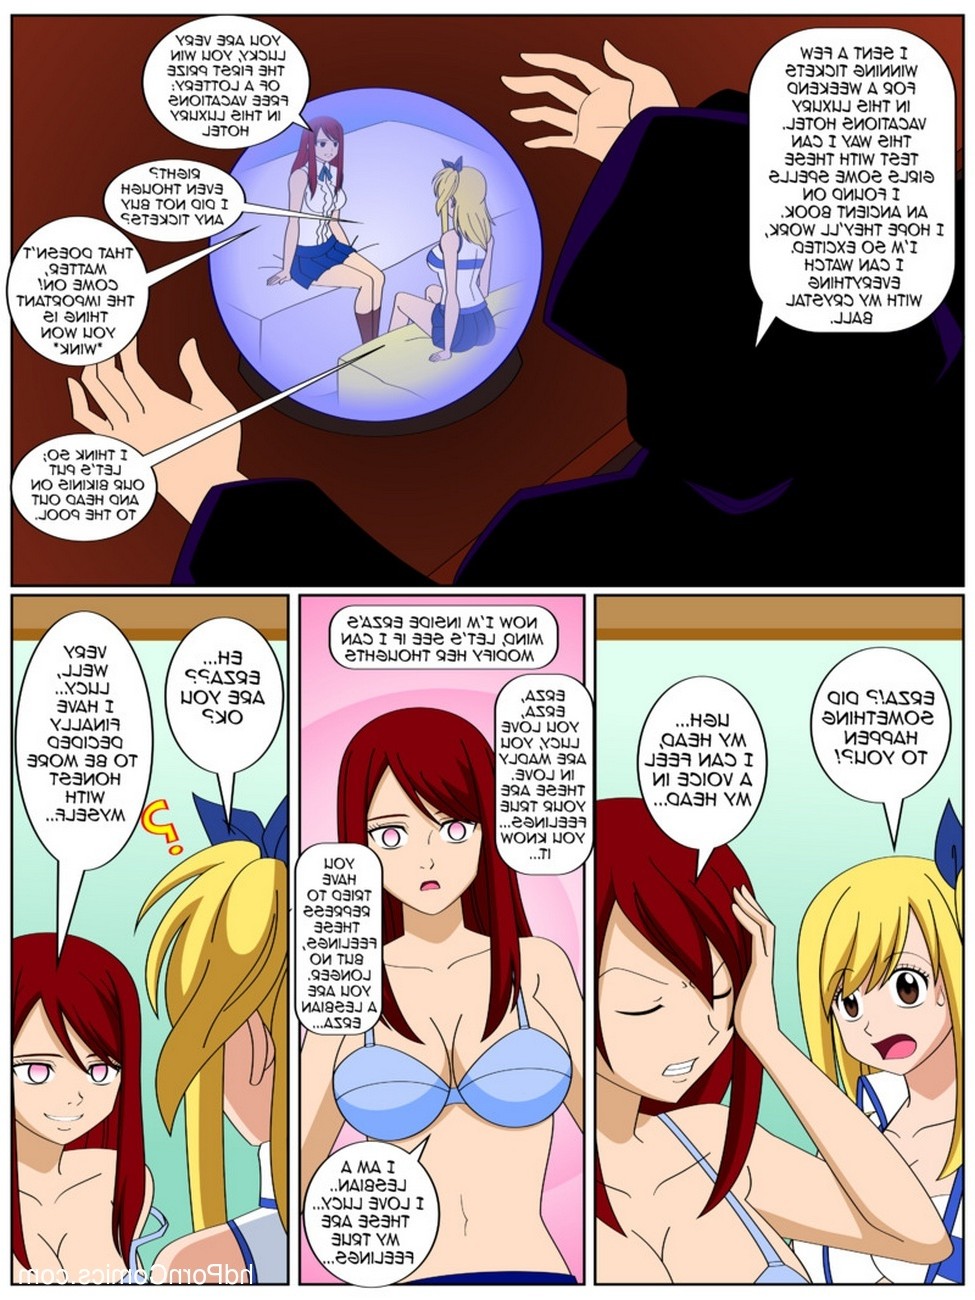 playing-with-dolls-sex-comic image_35.jpg